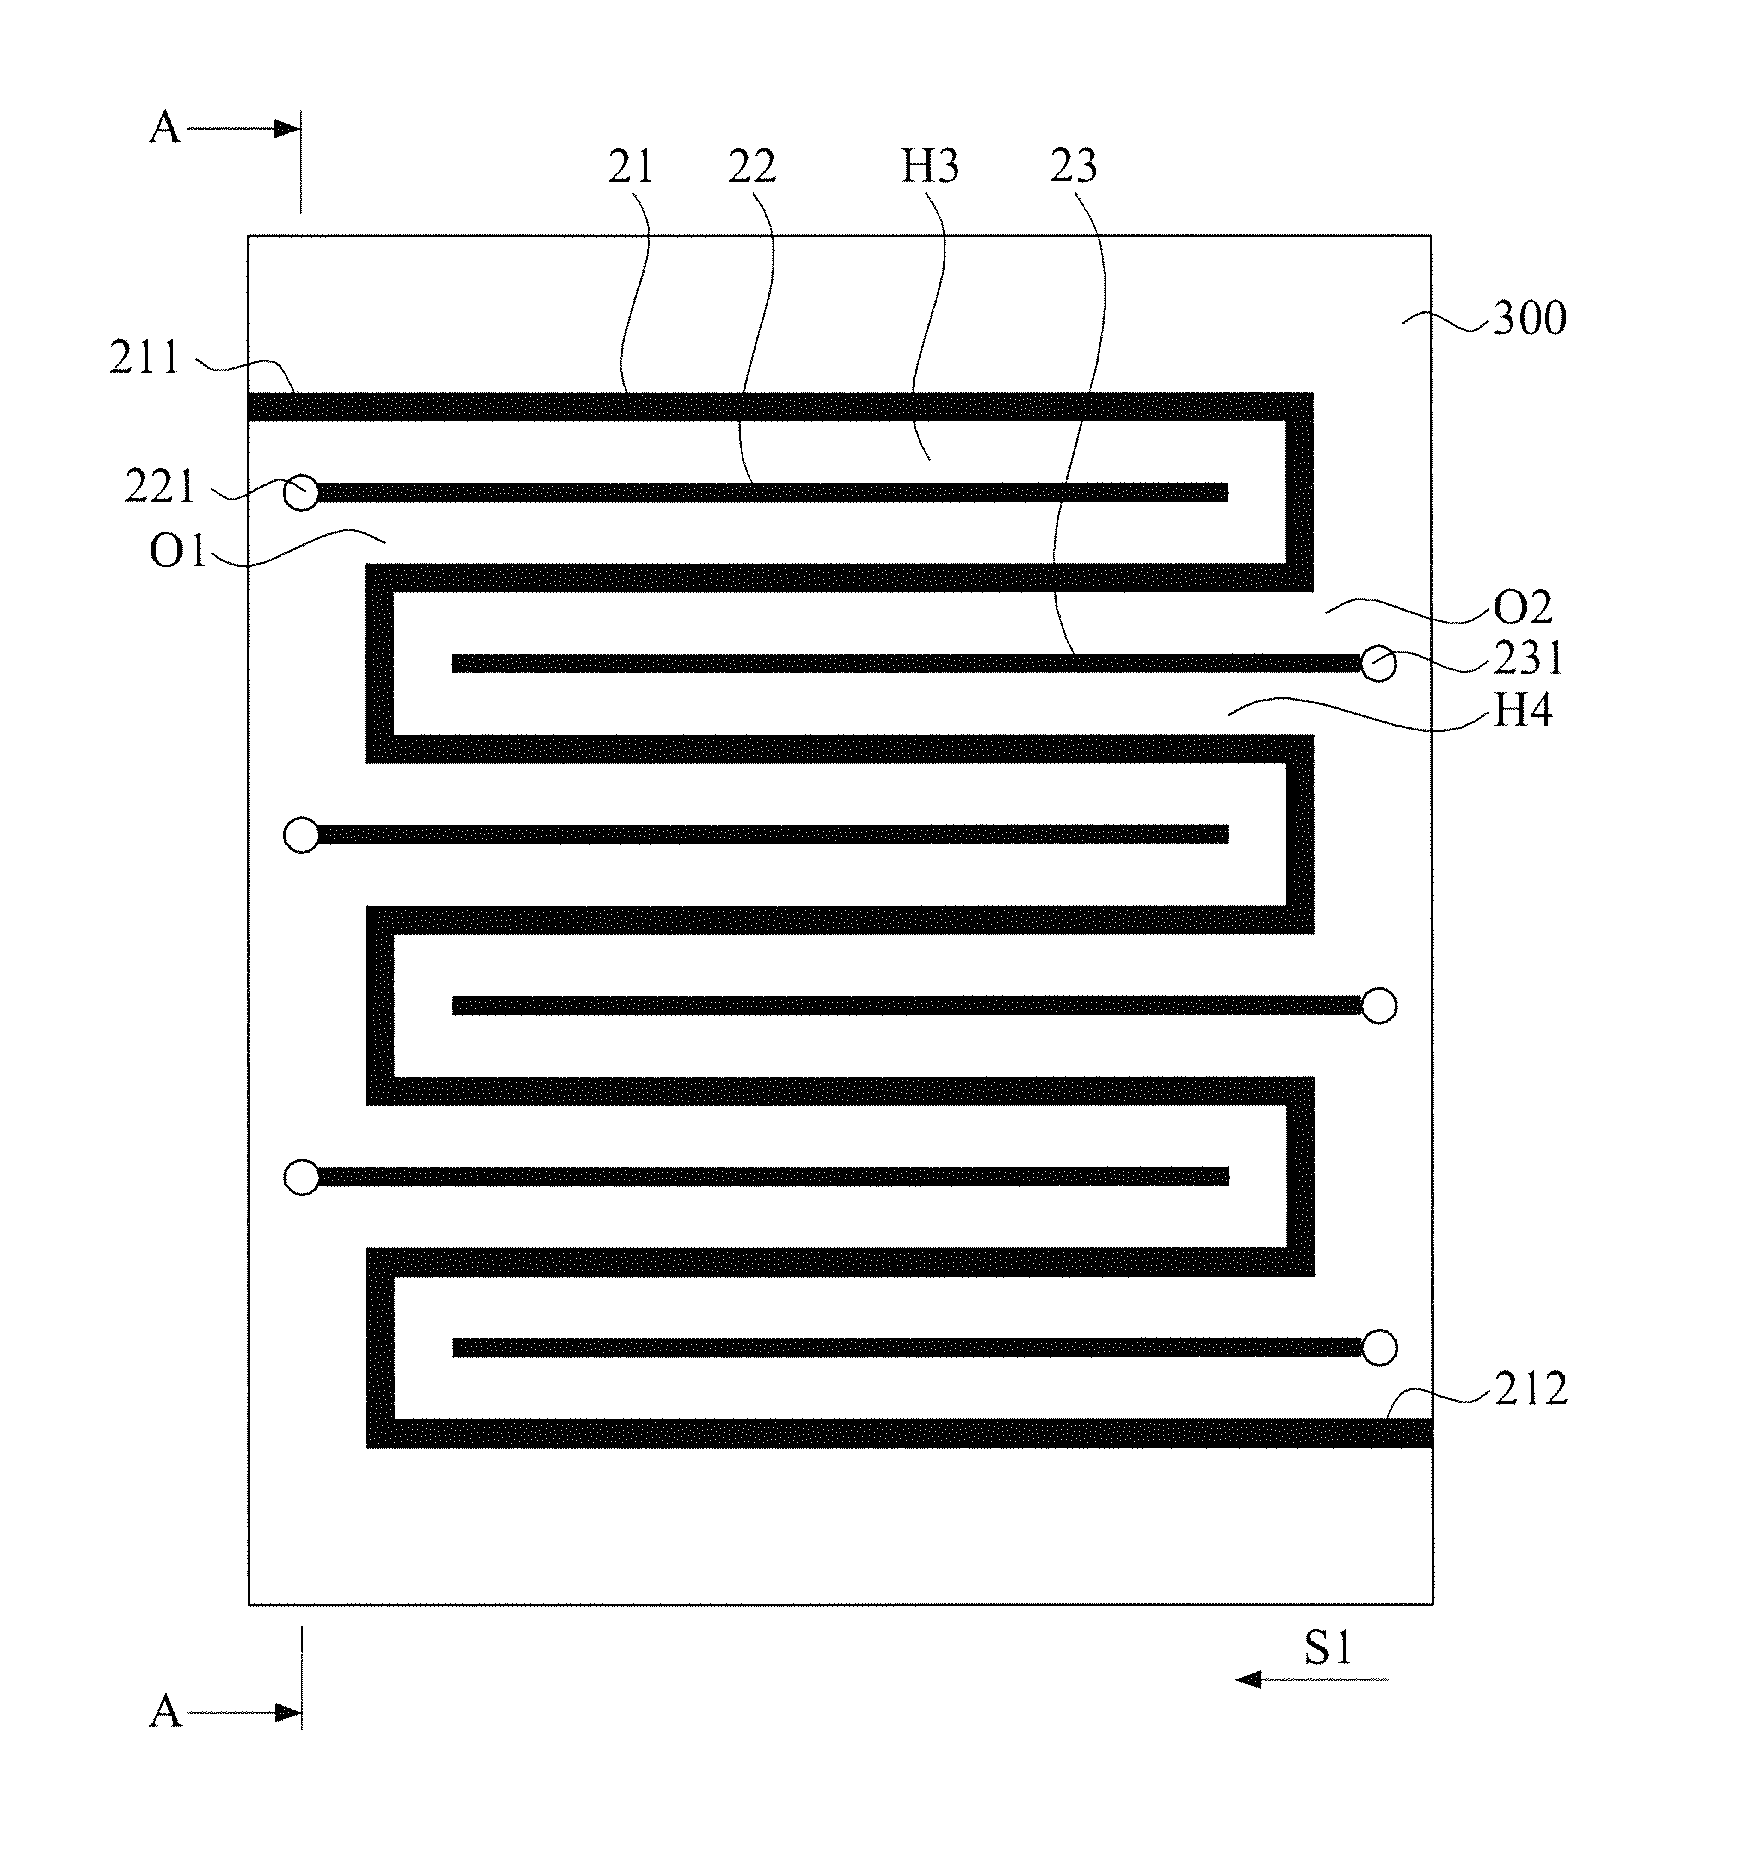 Delay line structure